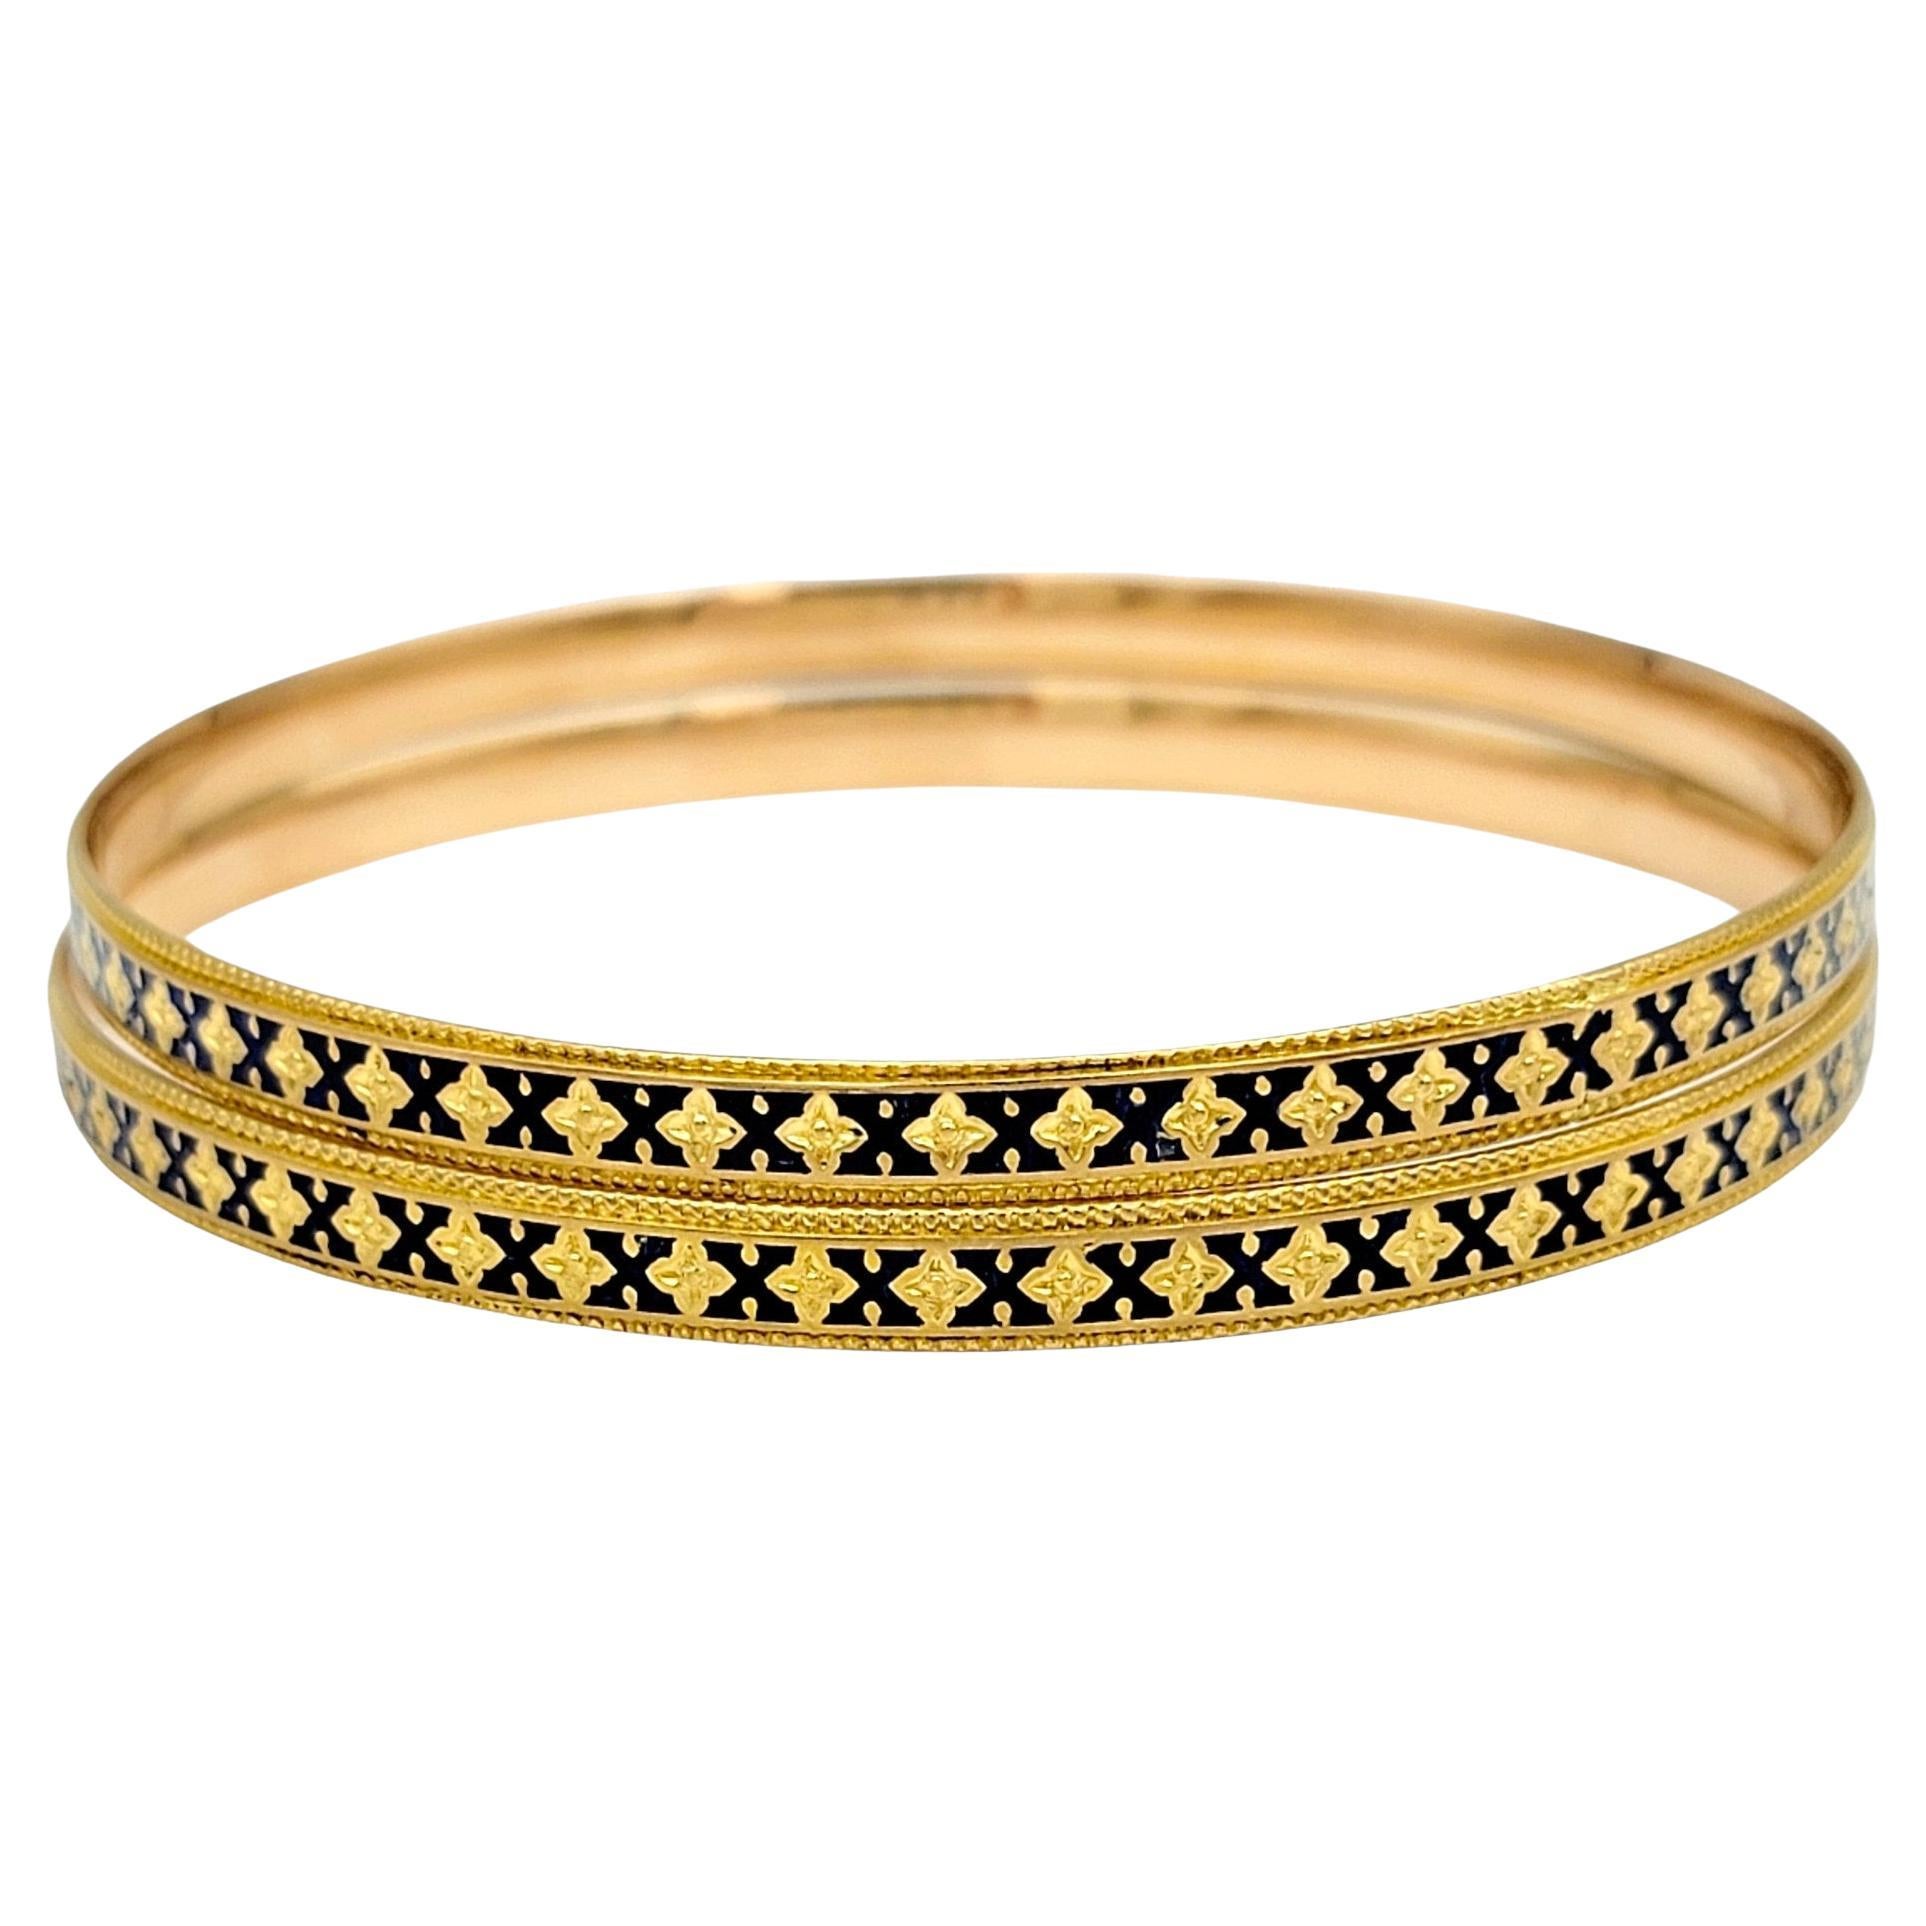 Introducing a stunning set of 2 stacking bangle bracelets, crafted in luxurious 22 karat yellow gold, offering a timeless blend of elegance and versatility. Each bracelet features a delicate gold milgrain edging that adds a touch of refinement and